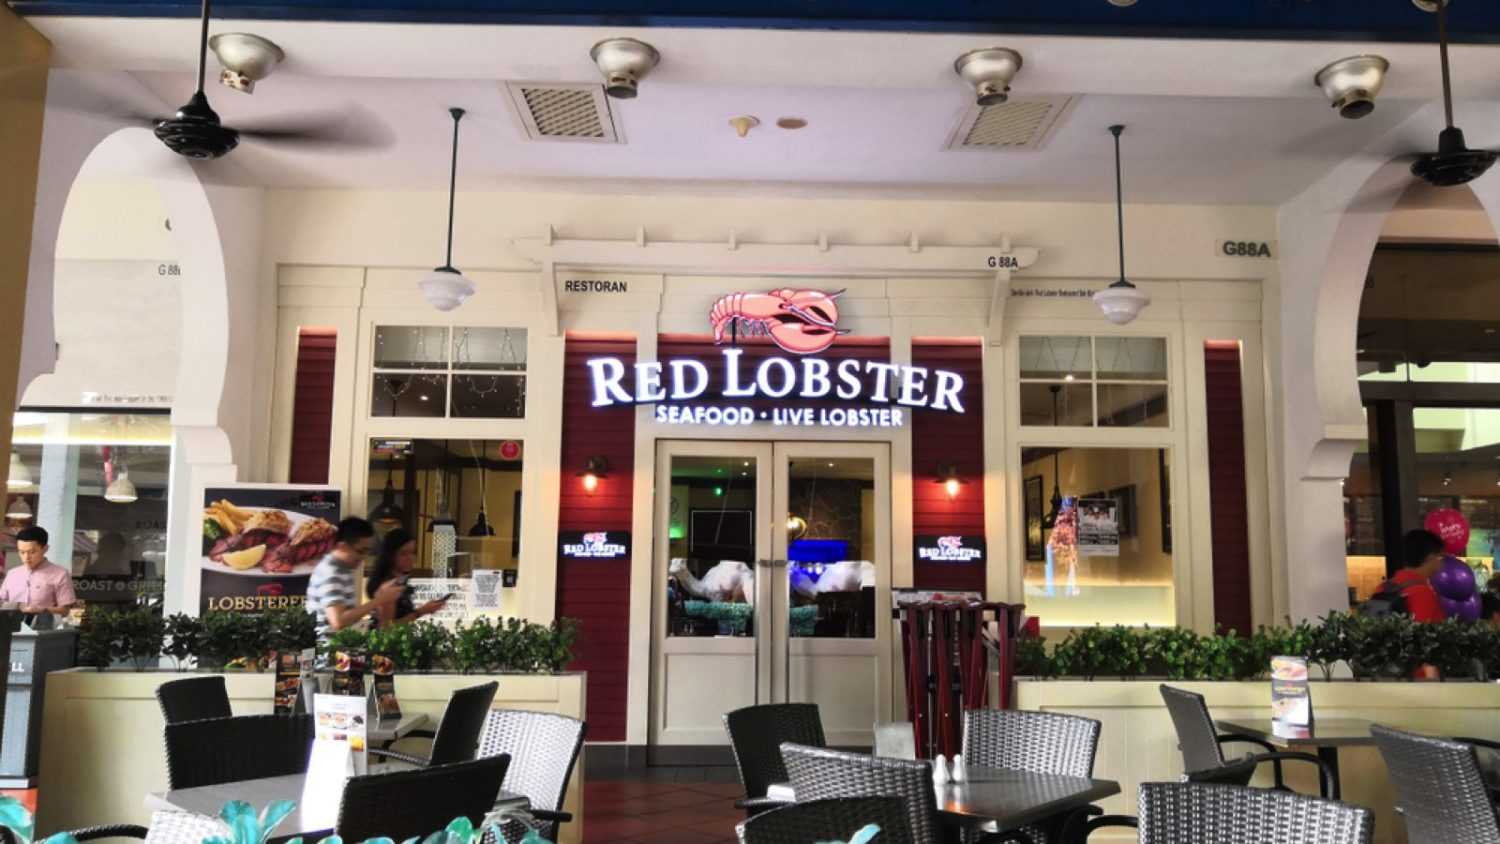 Damansara, Malaysia- October 2018: Red Lobster's first restaurant was opened in 1968 in Lakeland, Florida by founder Bill Darden